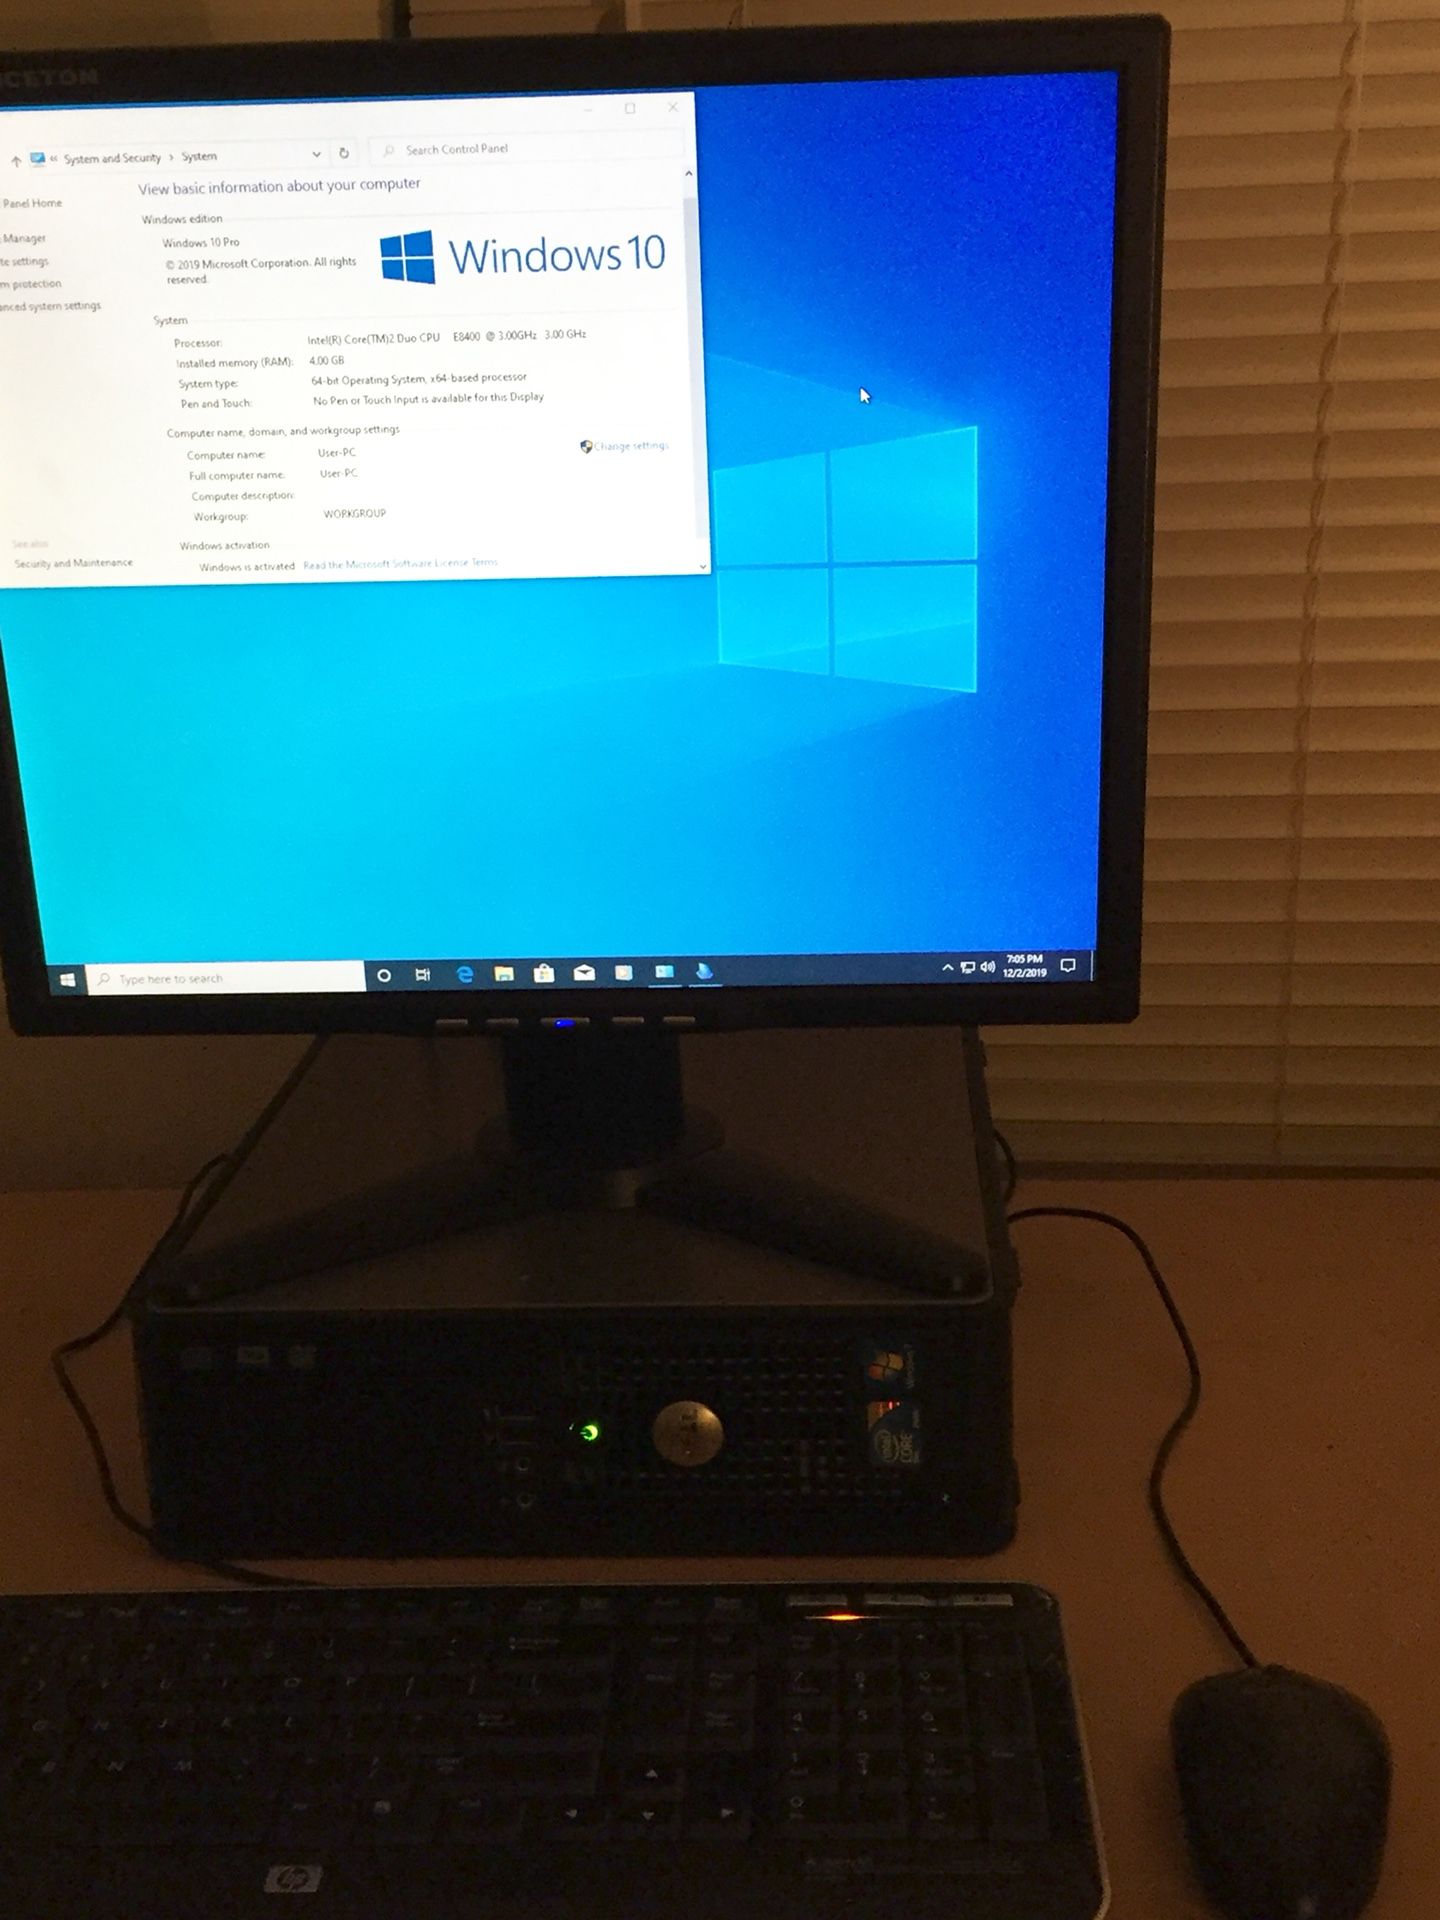 Windows 10 personal/student computer